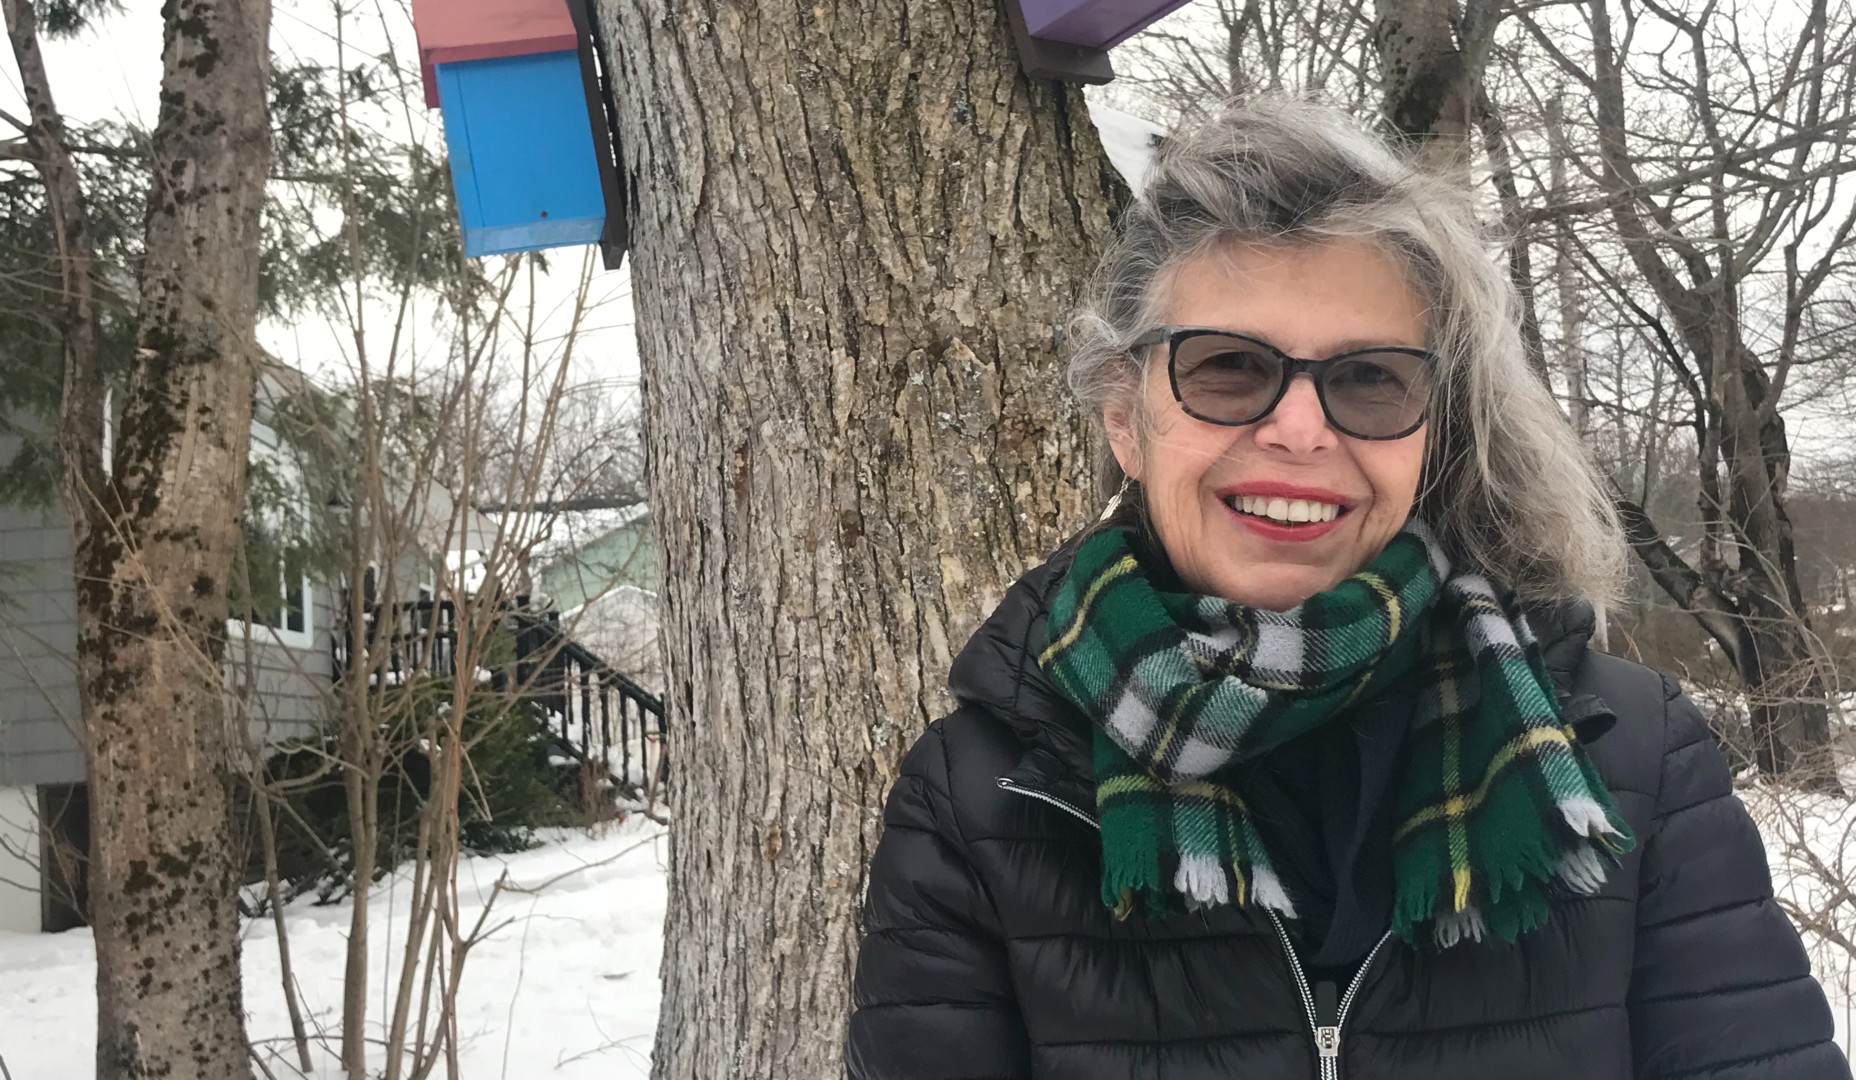 A woman with grey hair and a green scarf poses in front of a tree on a snowy day.